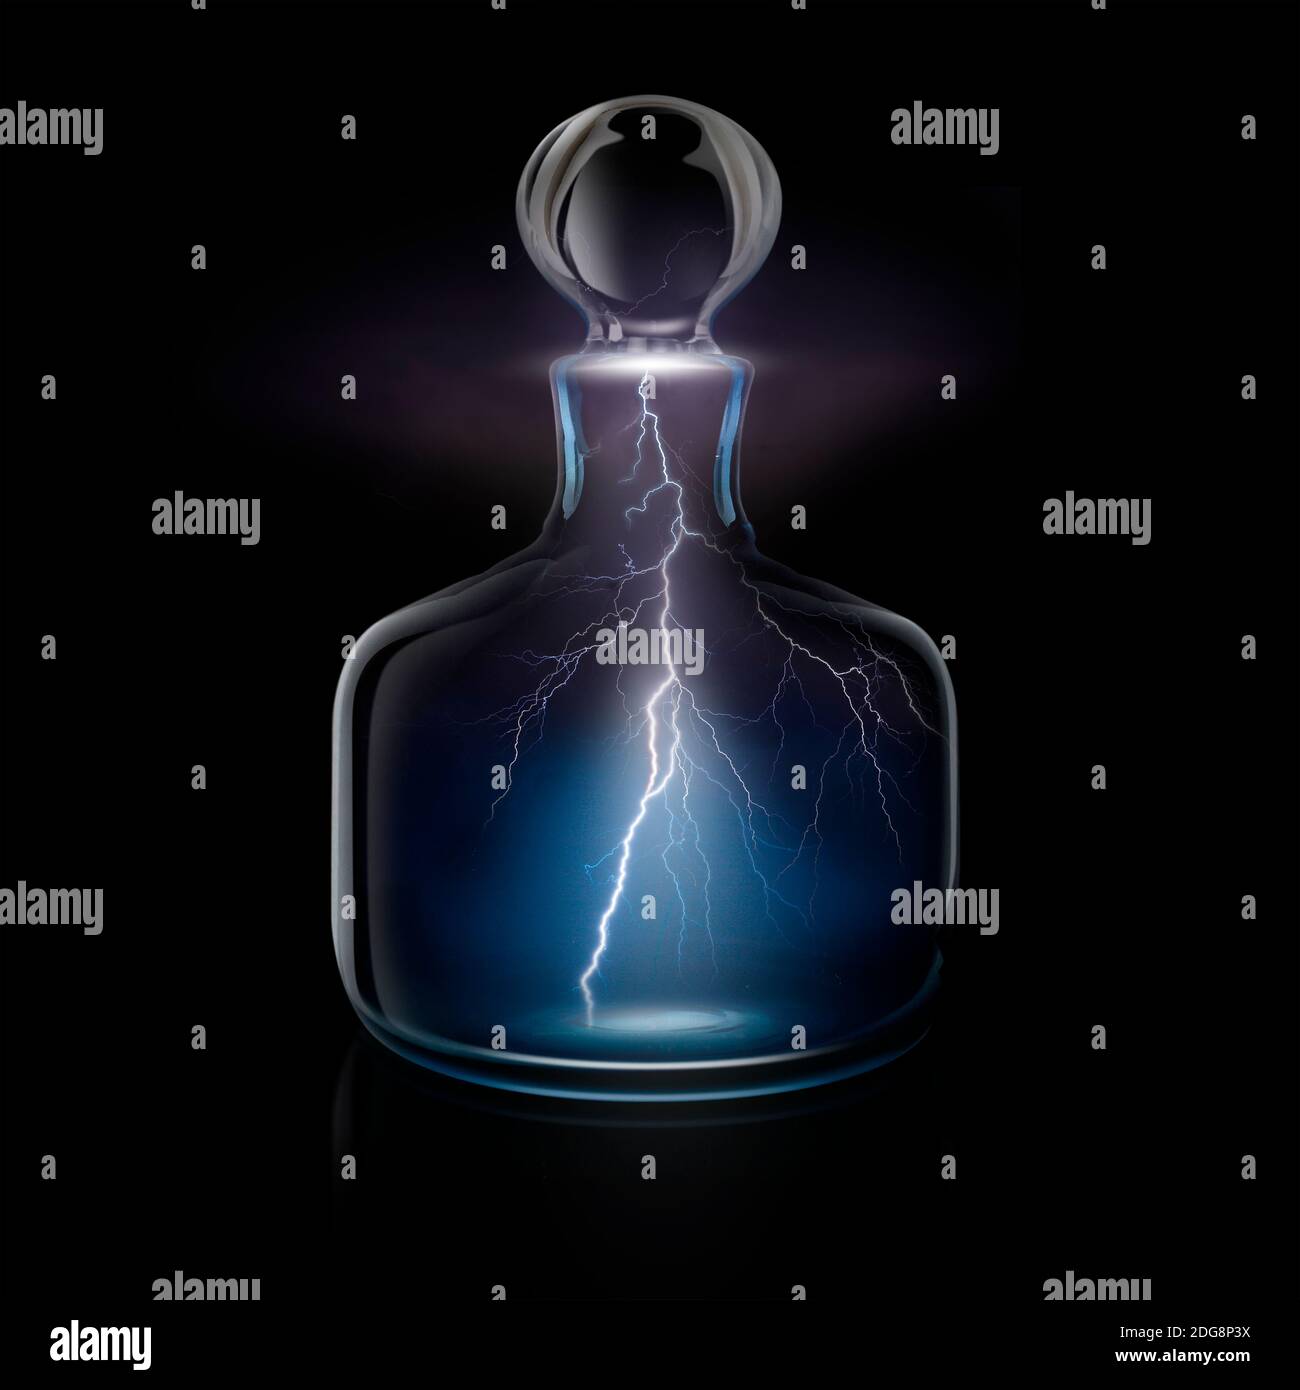 Lightning bolts in glass decanter Stock Photo